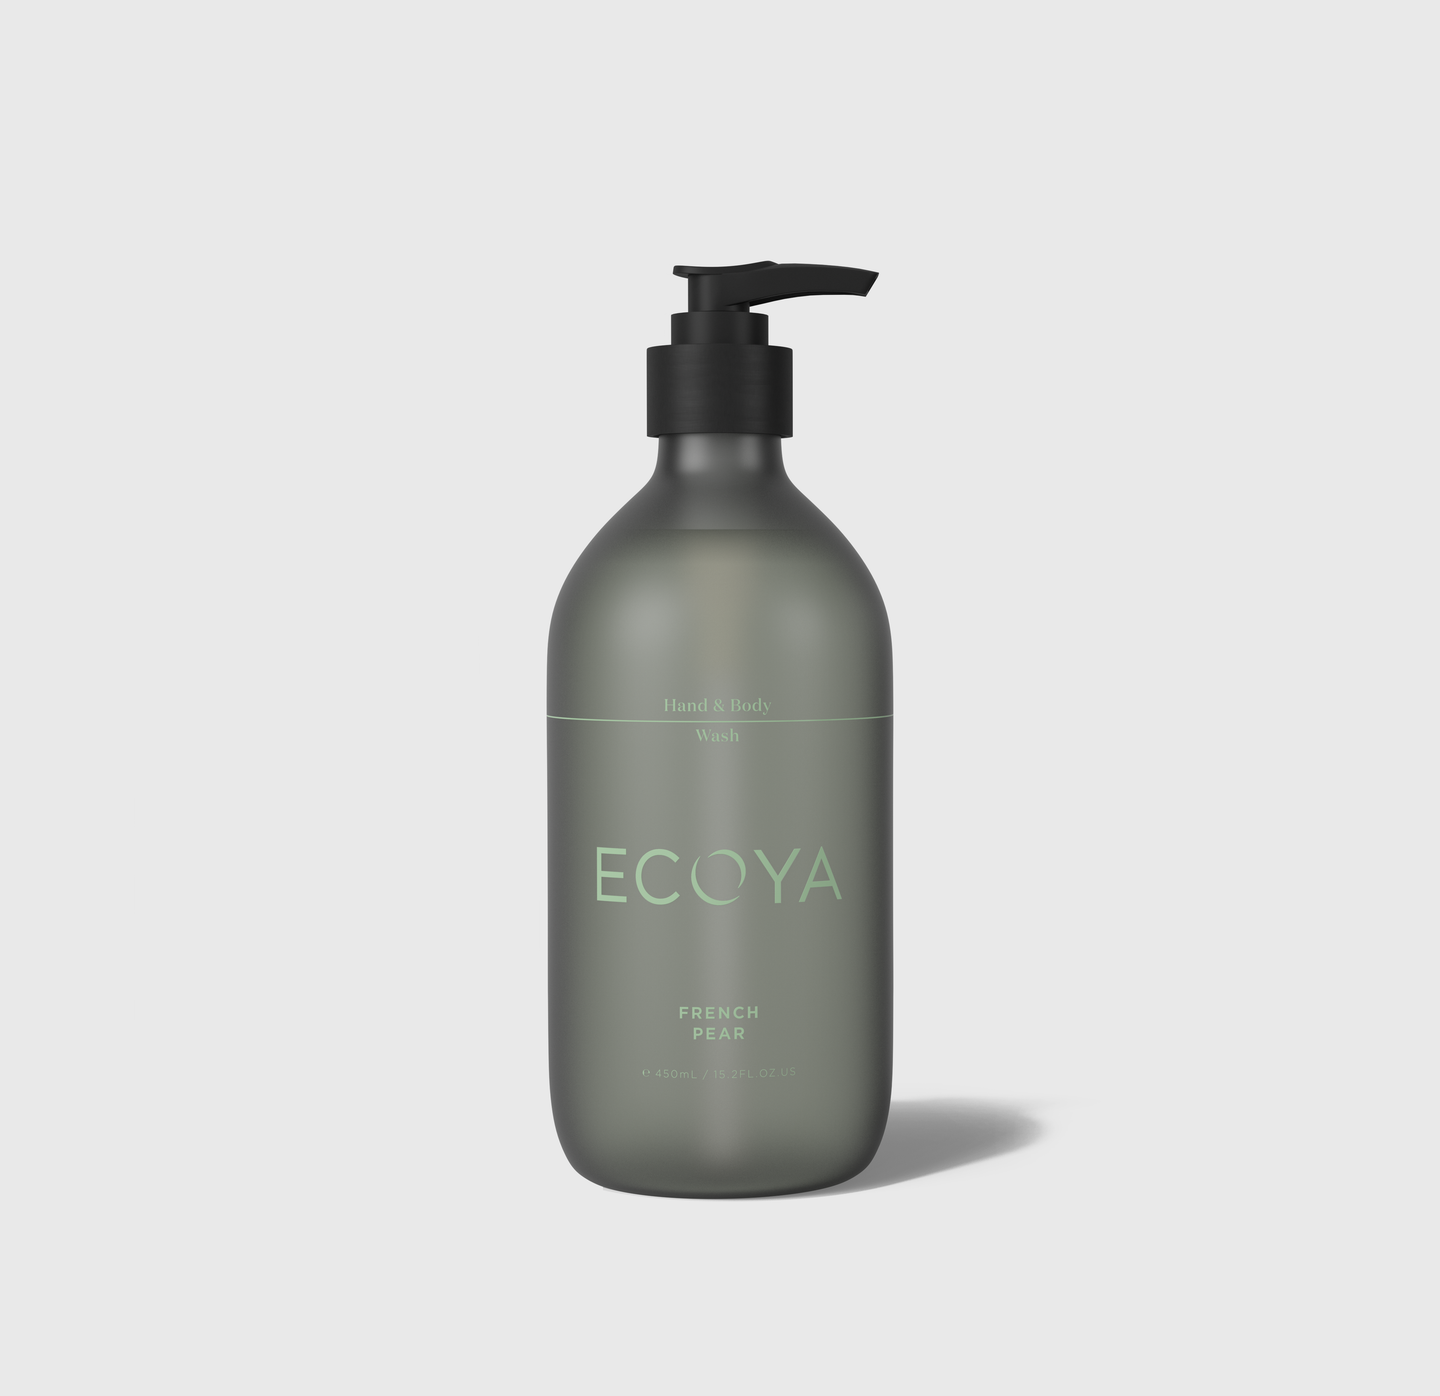 ECOYA French Pear Hand And Body Wash